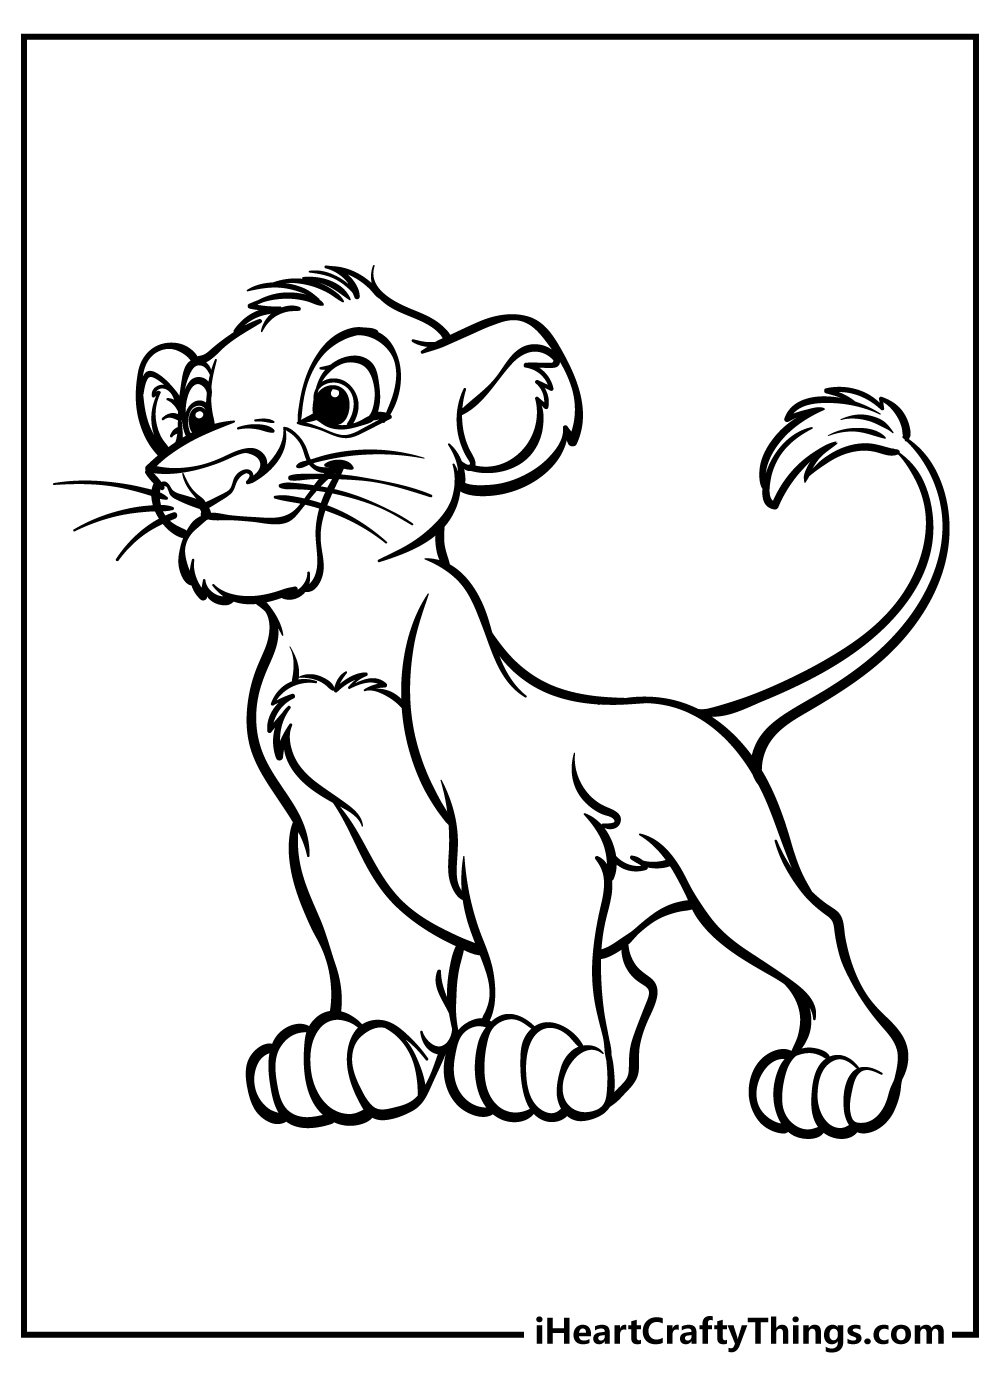 The Lion King Drawing The Head Of A Lion In The Crown Stock Illustration -  Download Image Now - iStock